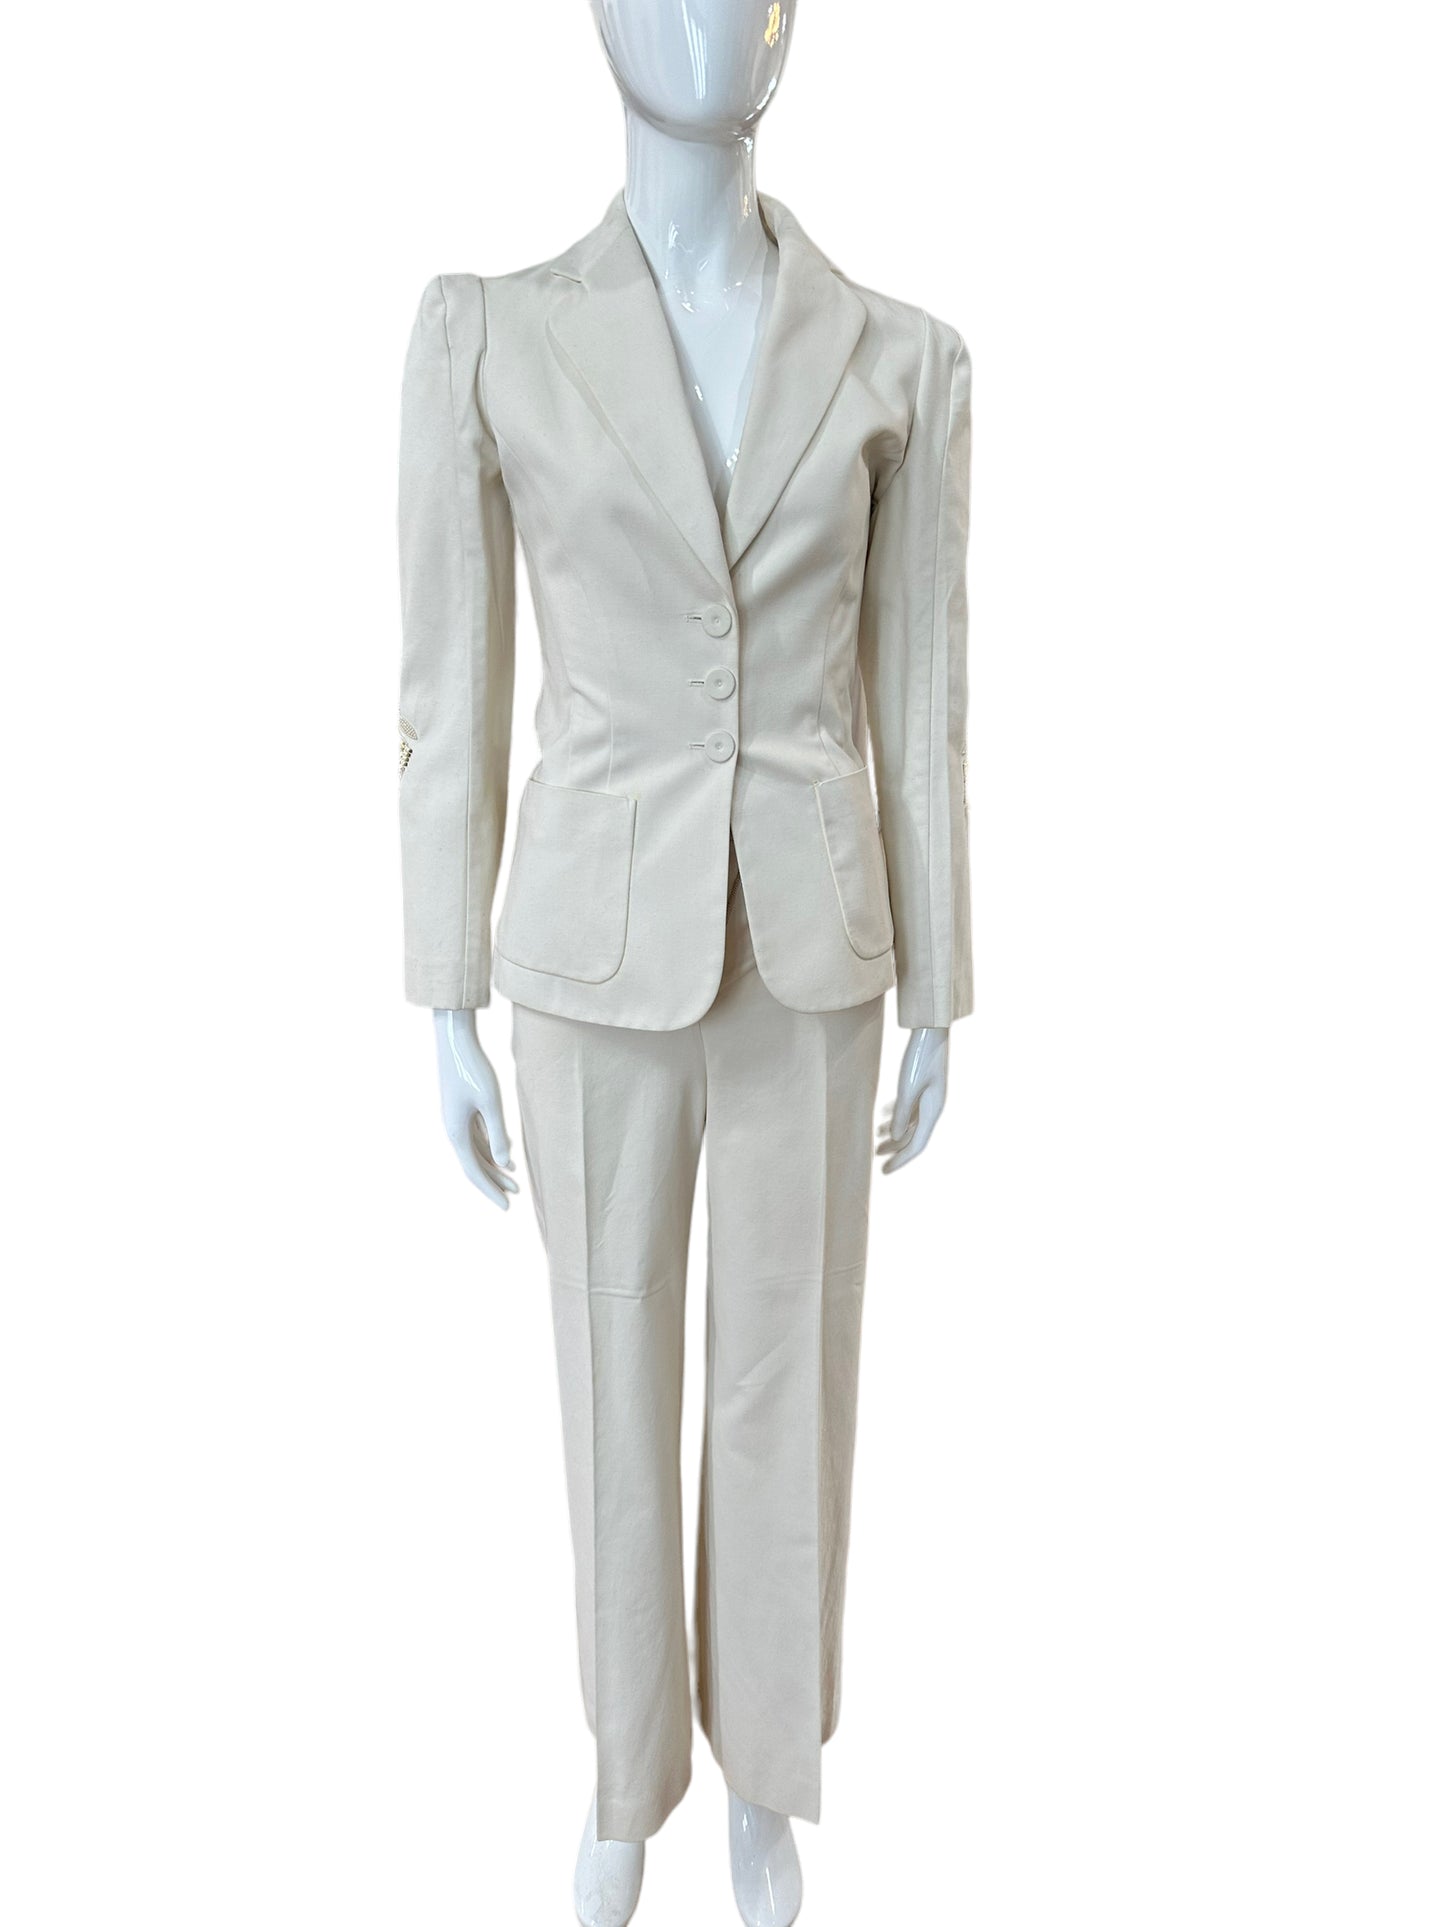 Chloe by Phoebe Philo 2002 Ivory Cut Out Pants Suit F38